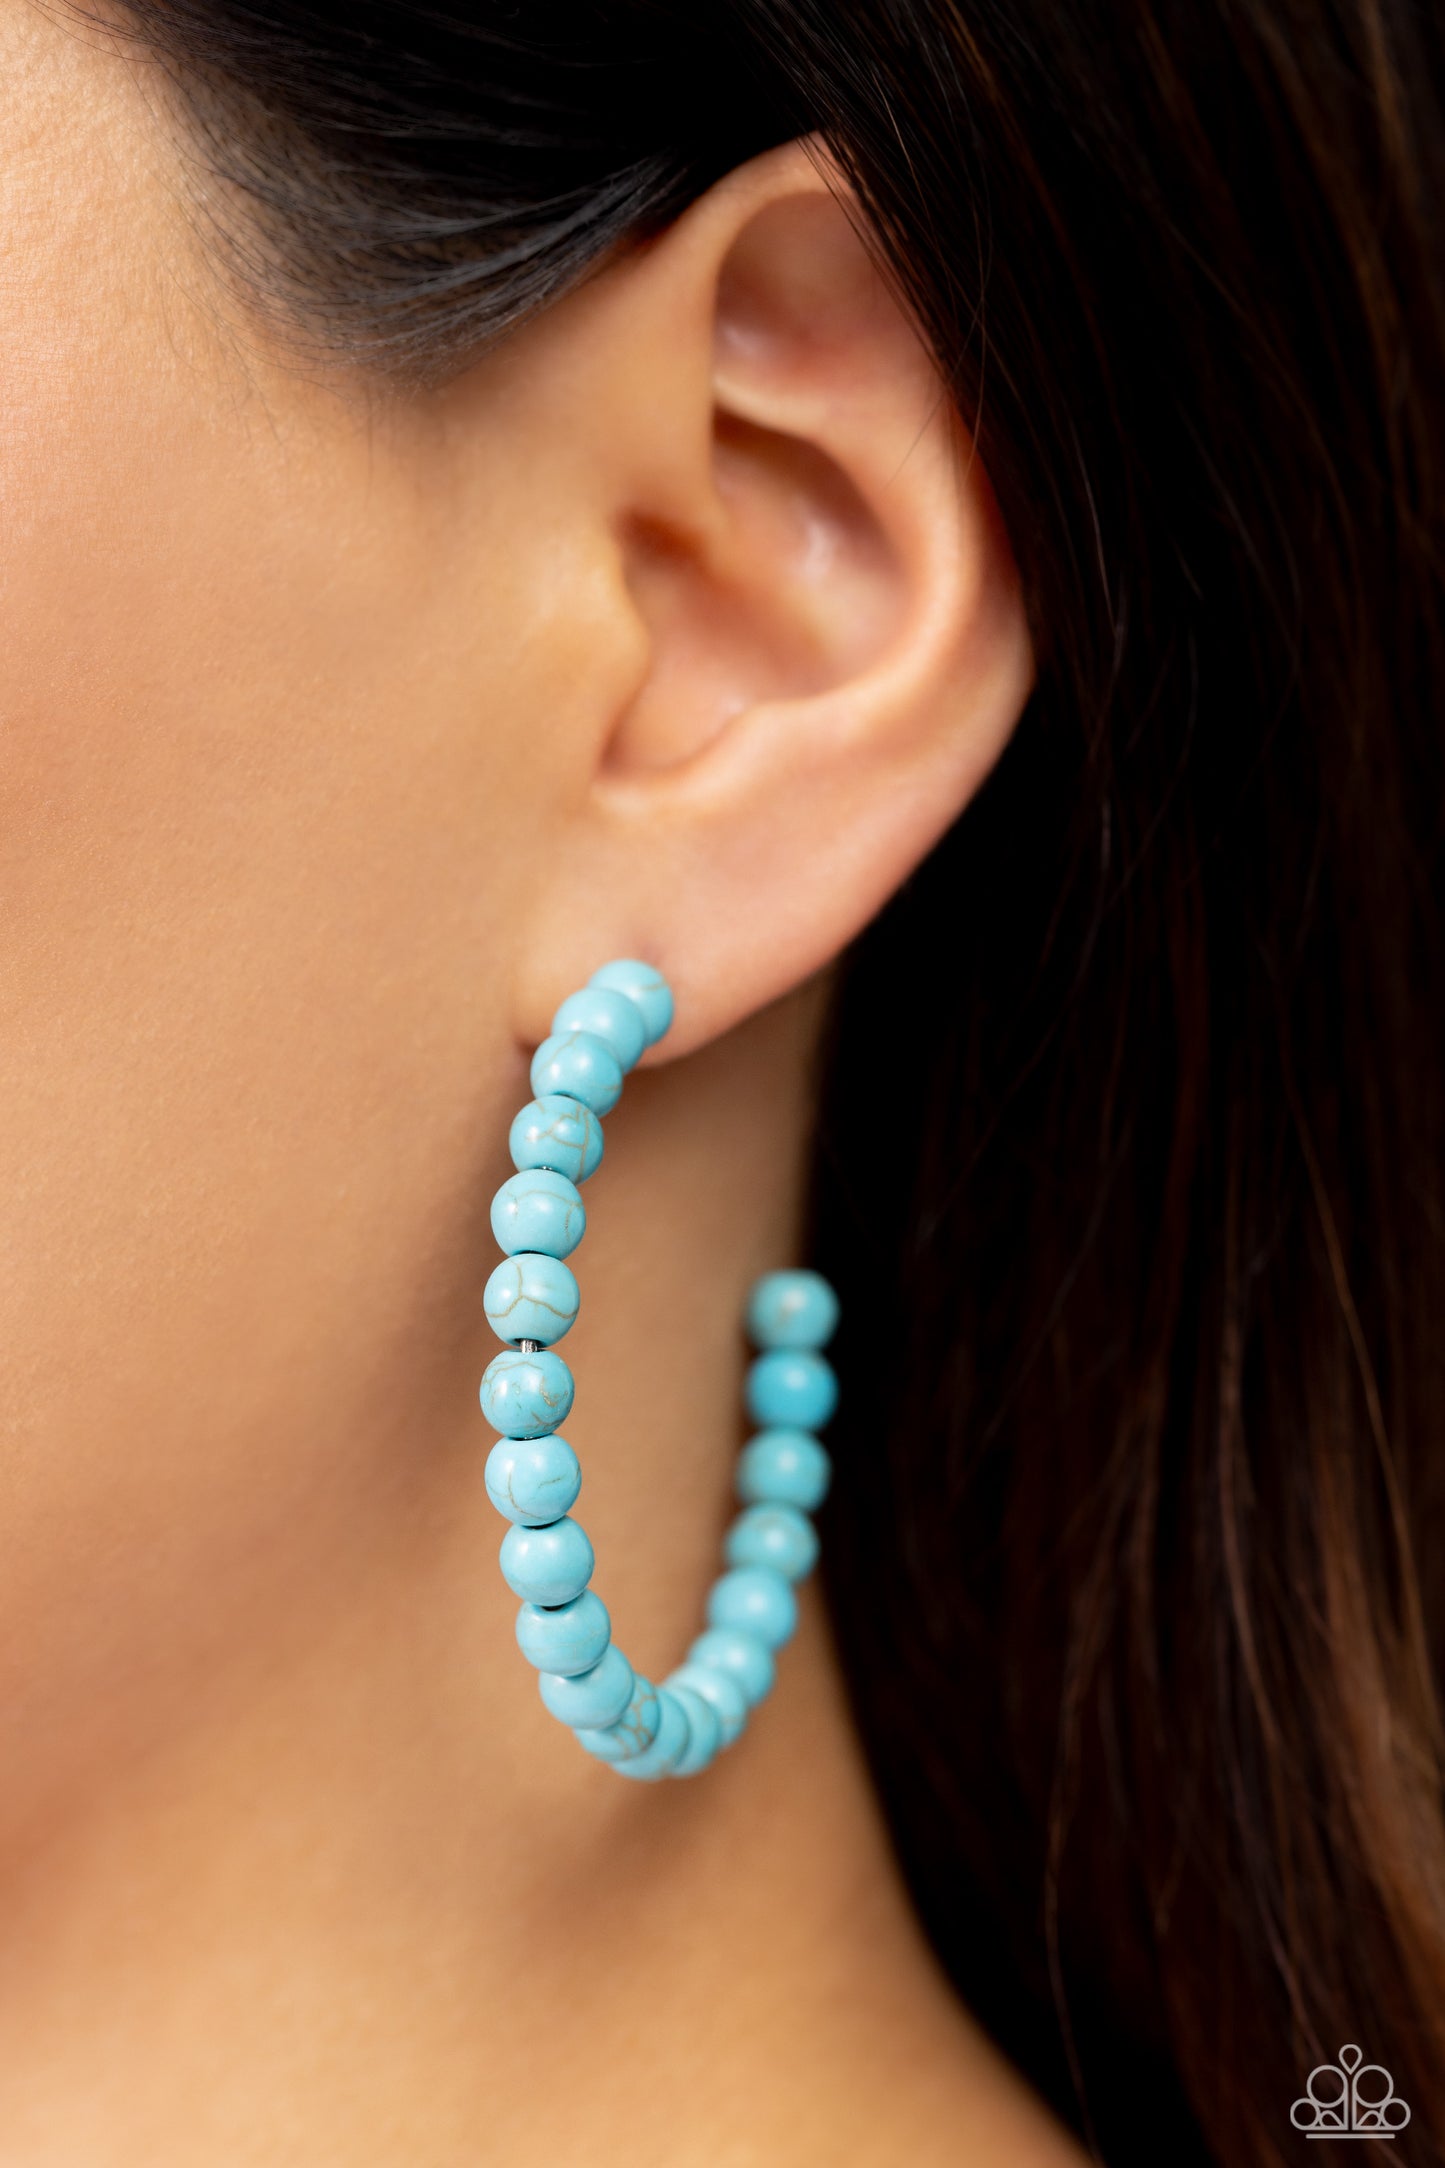 Paparazzi Accessories - Rural Retrograde - Blue Hoop Earrings refreshing turquoise stone beads are threaded along a dainty wire hoop, resulting in an earthy flair. Earring attaches to a standard post fitting. Hoop measures approximately 2" in diameter. Sold as one pair of hoop earrings.